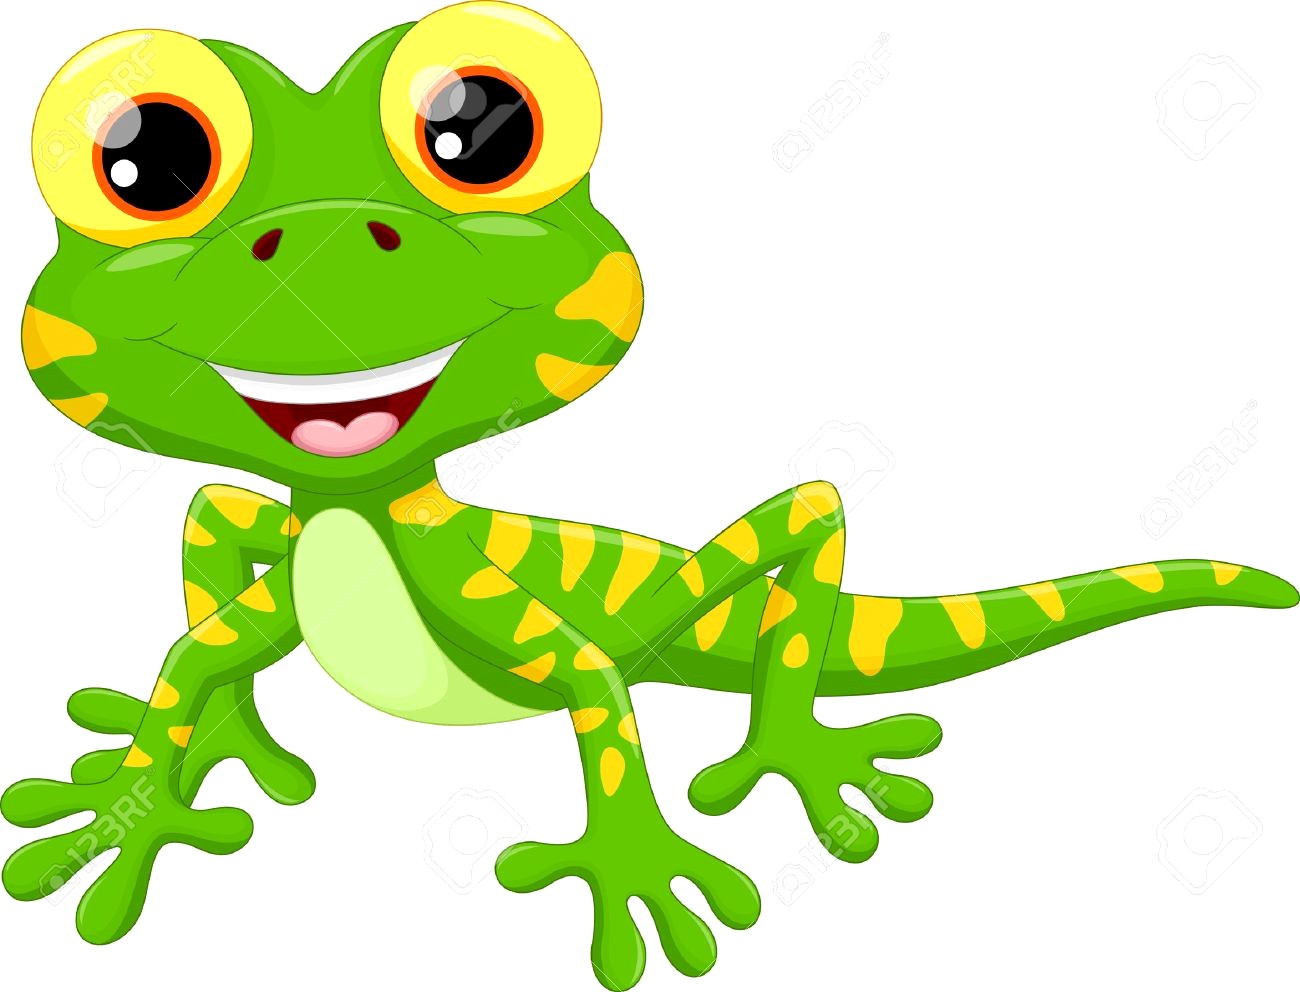 Lizard clipart cool, Lizard cool Transparent FREE for download on